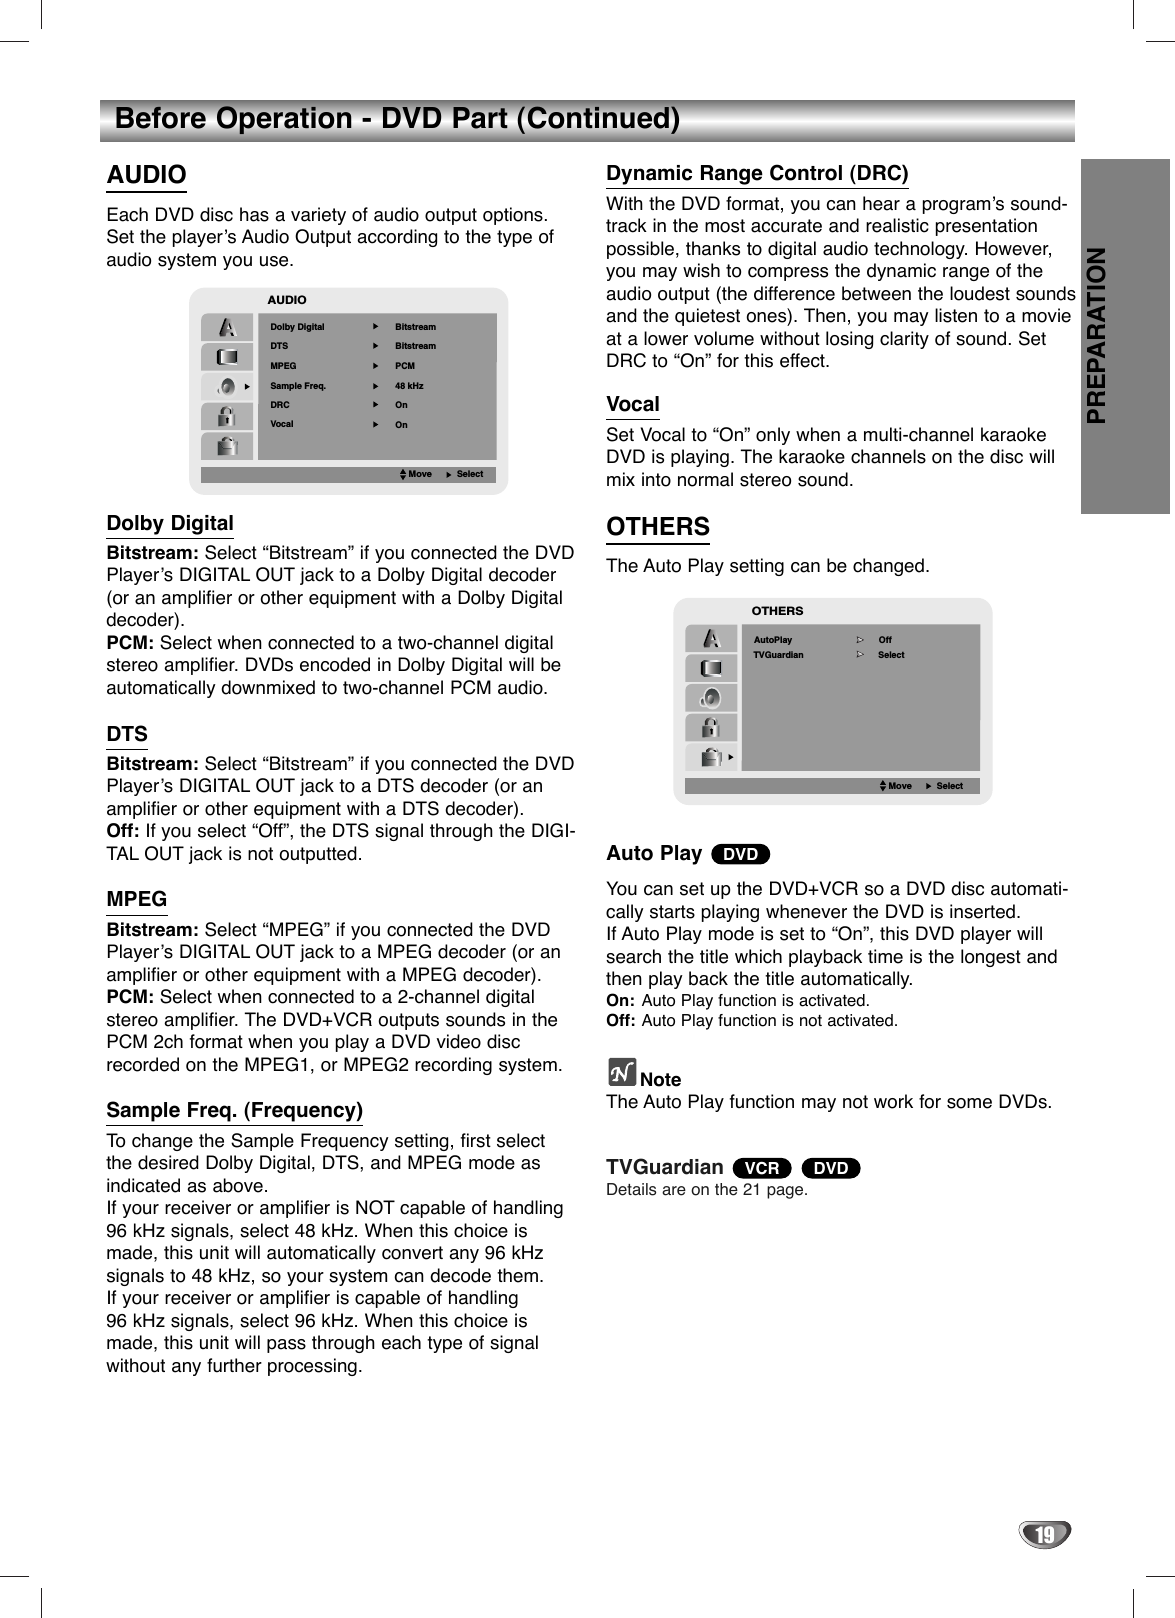 PREPARATION19Before Operation - DVD Part (Continued)AUDIOEach DVD disc has a variety of audio output options.Set the player’s Audio Output according to the type ofaudio system you use. Dolby DigitalBitstream: Select “Bitstream” if you connected the DVDPlayer’s DIGITAL OUT jack to a Dolby Digital decoder(or an amplifier or other equipment with a Dolby Digitaldecoder).PCM: Select when connected to a two-channel digitalstereo amplifier. DVDs encoded in Dolby Digital will beautomatically downmixed to two-channel PCM audio.DTSBitstream: Select “Bitstream” if you connected the DVDPlayer’s DIGITAL OUT jack to a DTS decoder (or anamplifier or other equipment with a DTS decoder).Off: If you select “Off”, the DTS signal through the DIGI-TAL OUT jack is not outputted.MPEGBitstream: Select “MPEG” if you connected the DVDPlayer’s DIGITAL OUT jack to a MPEG decoder (or anamplifier or other equipment with a MPEG decoder).PCM: Select when connected to a 2-channel digitalstereo amplifier. The DVD+VCR outputs sounds in thePCM 2ch format when you play a DVD video discrecorded on the MPEG1, or MPEG2 recording system.Sample Freq. (Frequency)To  change the Sample Frequency setting, first selectthe desired Dolby Digital, DTS, and MPEG mode asindicated as above.If your receiver or amplifier is NOT capable of handling96 kHz signals, select 48 kHz. When this choice ismade, this unit will automatically convert any 96 kHzsignals to 48 kHz, so your system can decode them. If your receiver or amplifier is capable of handling 96 kHz signals, select 96 kHz. When this choice ismade, this unit will pass through each type of signalwithout any further processing. Dynamic Range Control (DRC) With the DVD format, you can hear a program’s sound-track in the most accurate and realistic presentationpossible, thanks to digital audio technology. However,you may wish to compress the dynamic range of theaudio output (the difference between the loudest soundsand the quietest ones). Then, you may listen to a movieat a lower volume without losing clarity of sound. SetDRC to “On” for this effect.VocalSet Vocal to “On” only when a multi-channel karaokeDVD is playing. The karaoke channels on the disc willmix into normal stereo sound.OTHERSThe Auto Play setting can be changed.Auto Play You can set up the DVD+VCR so a DVD disc automati-cally starts playing whenever the DVD is inserted. If Auto Play mode is set to “On”, this DVD player willsearch the title which playback time is the longest andthen play back the title automatically. On: Auto Play function is activated.Off: Auto Play function is not activated.NoteThe Auto Play function may not work for some DVDs.TVGuardian Details are on the 21 page.DVDVCRDVDAUDIODolby DigitalBitstreamPCM48 kHzBitstreamDTS   MPEG Sample Freq.OnOnDRCVocalMoveSelect         OffAutoPlayOTHERSMoveSelectSelectTVGuardian